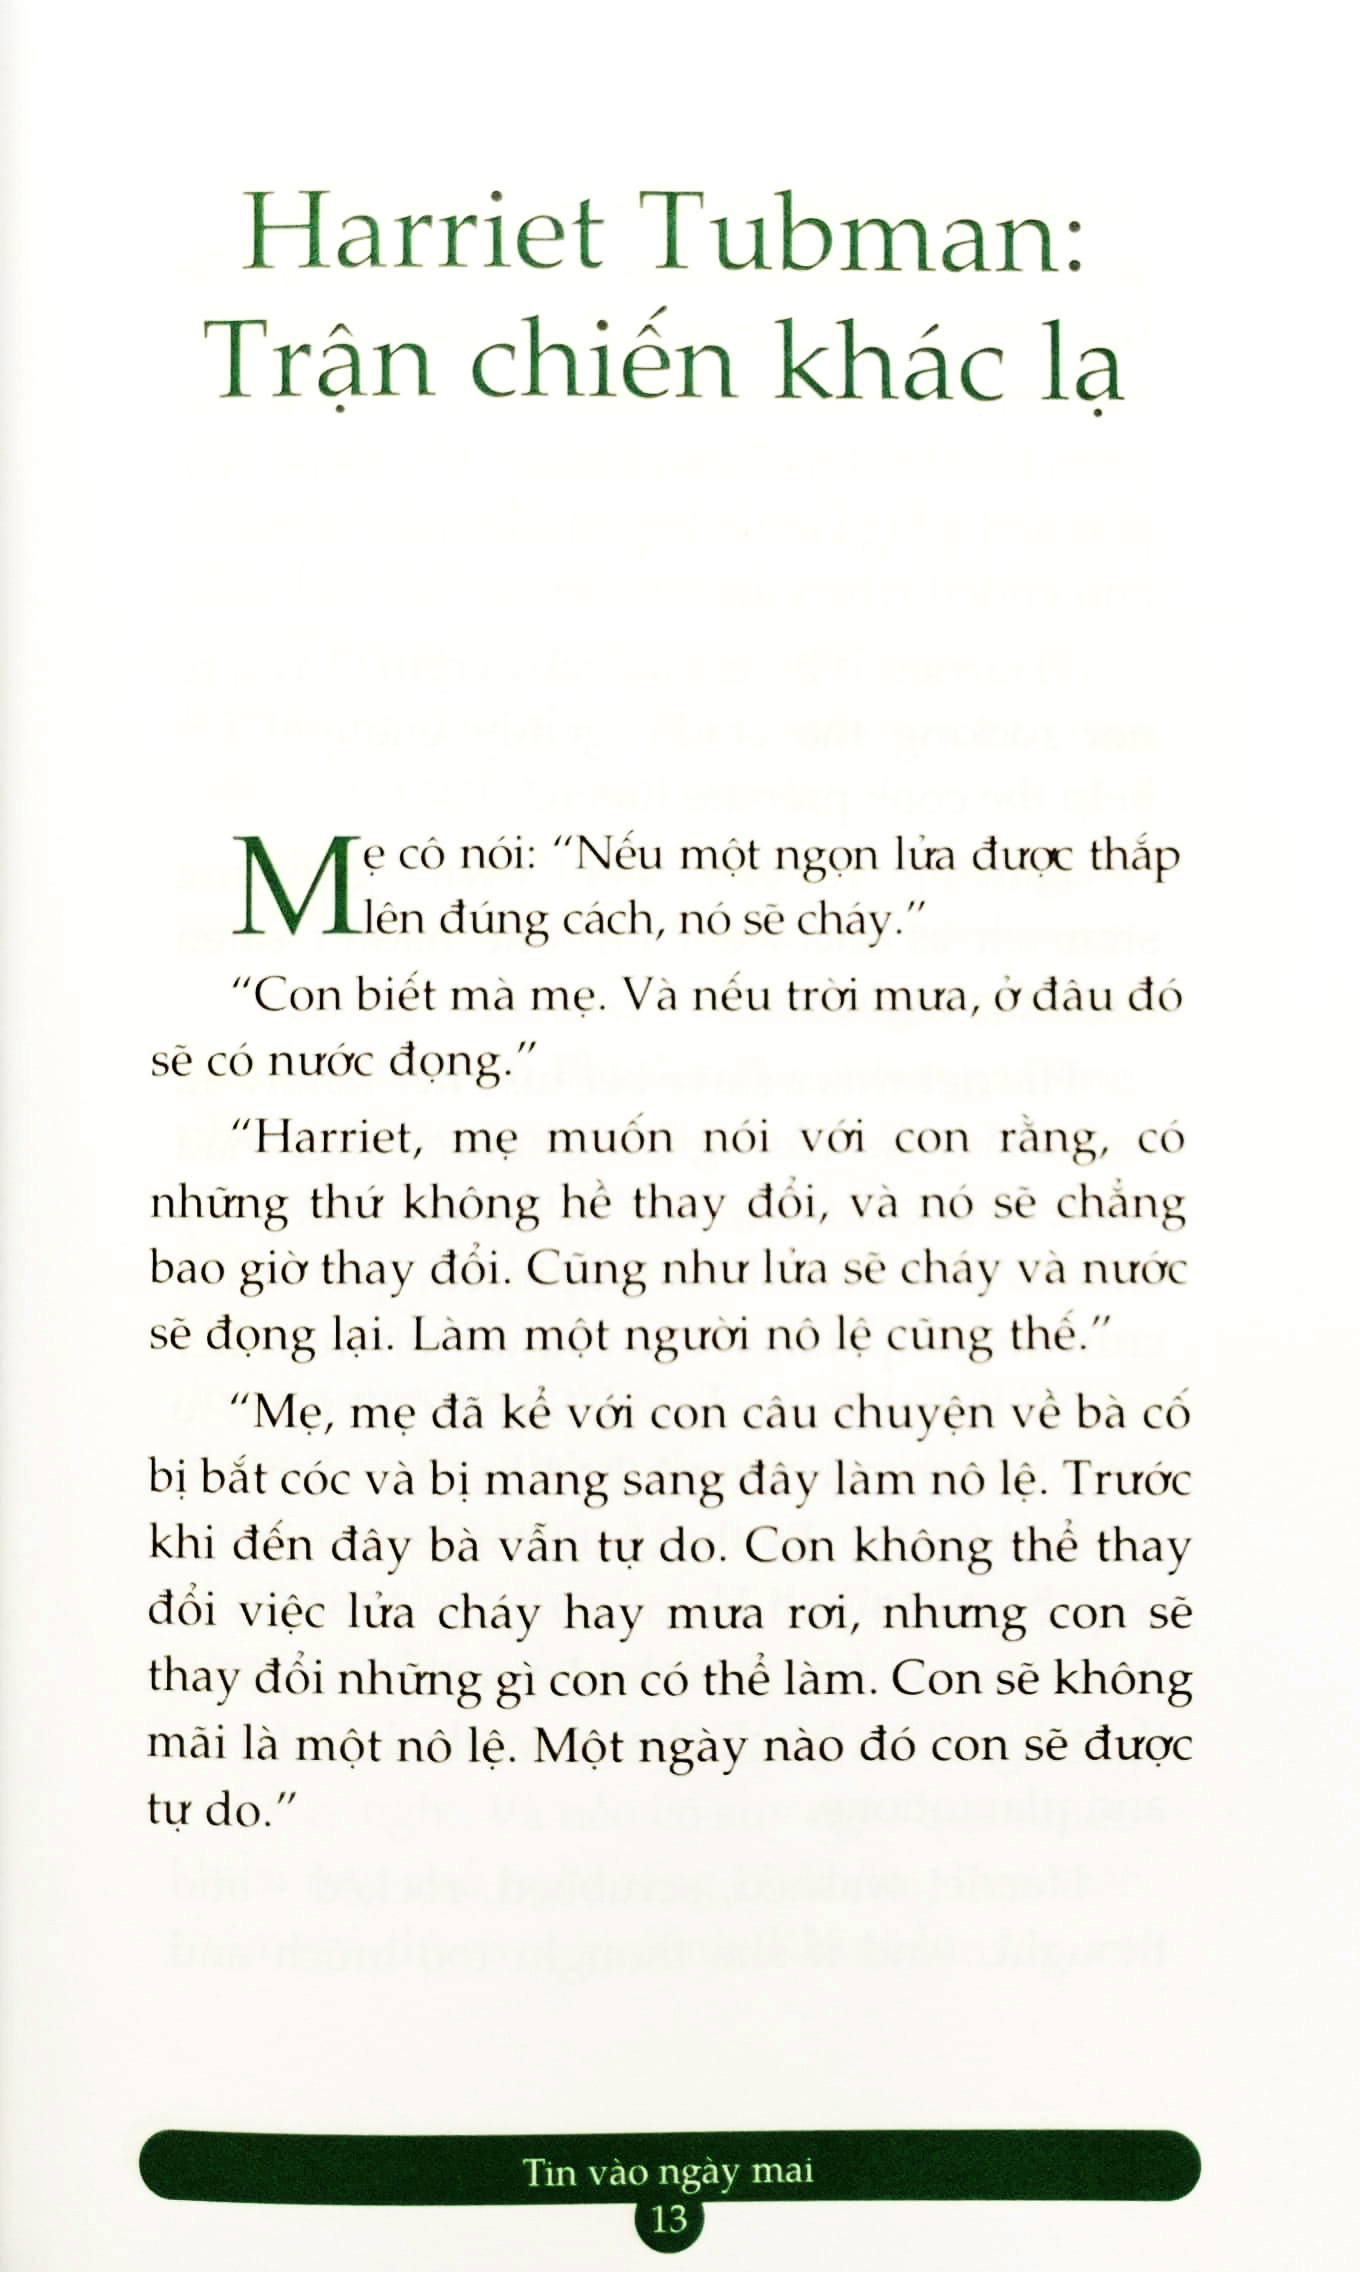 Chicken Soup For The Soul Stories For A Better World 19 - Tin Vào Ngày Mai PDF